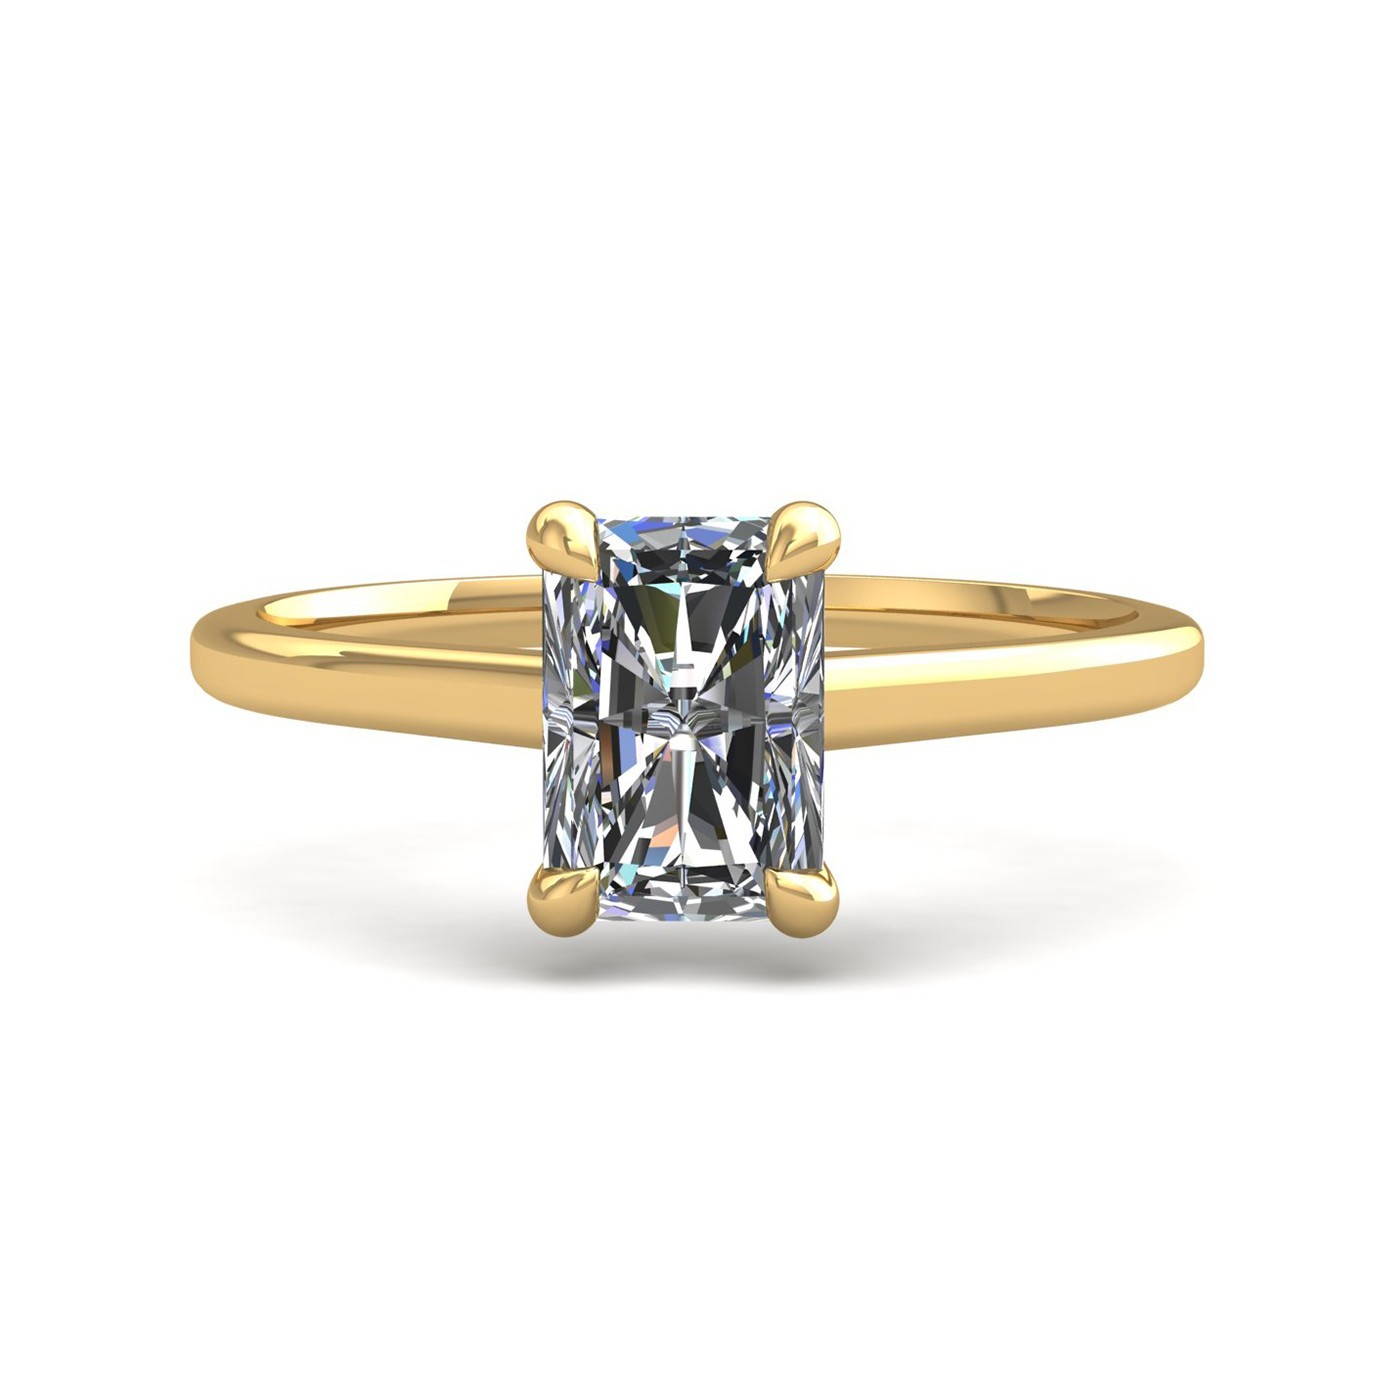 18k white gold  1,00 ct 4 prongs solitaire radiant cut diamond engagement ring with whisper thin band Photos & images